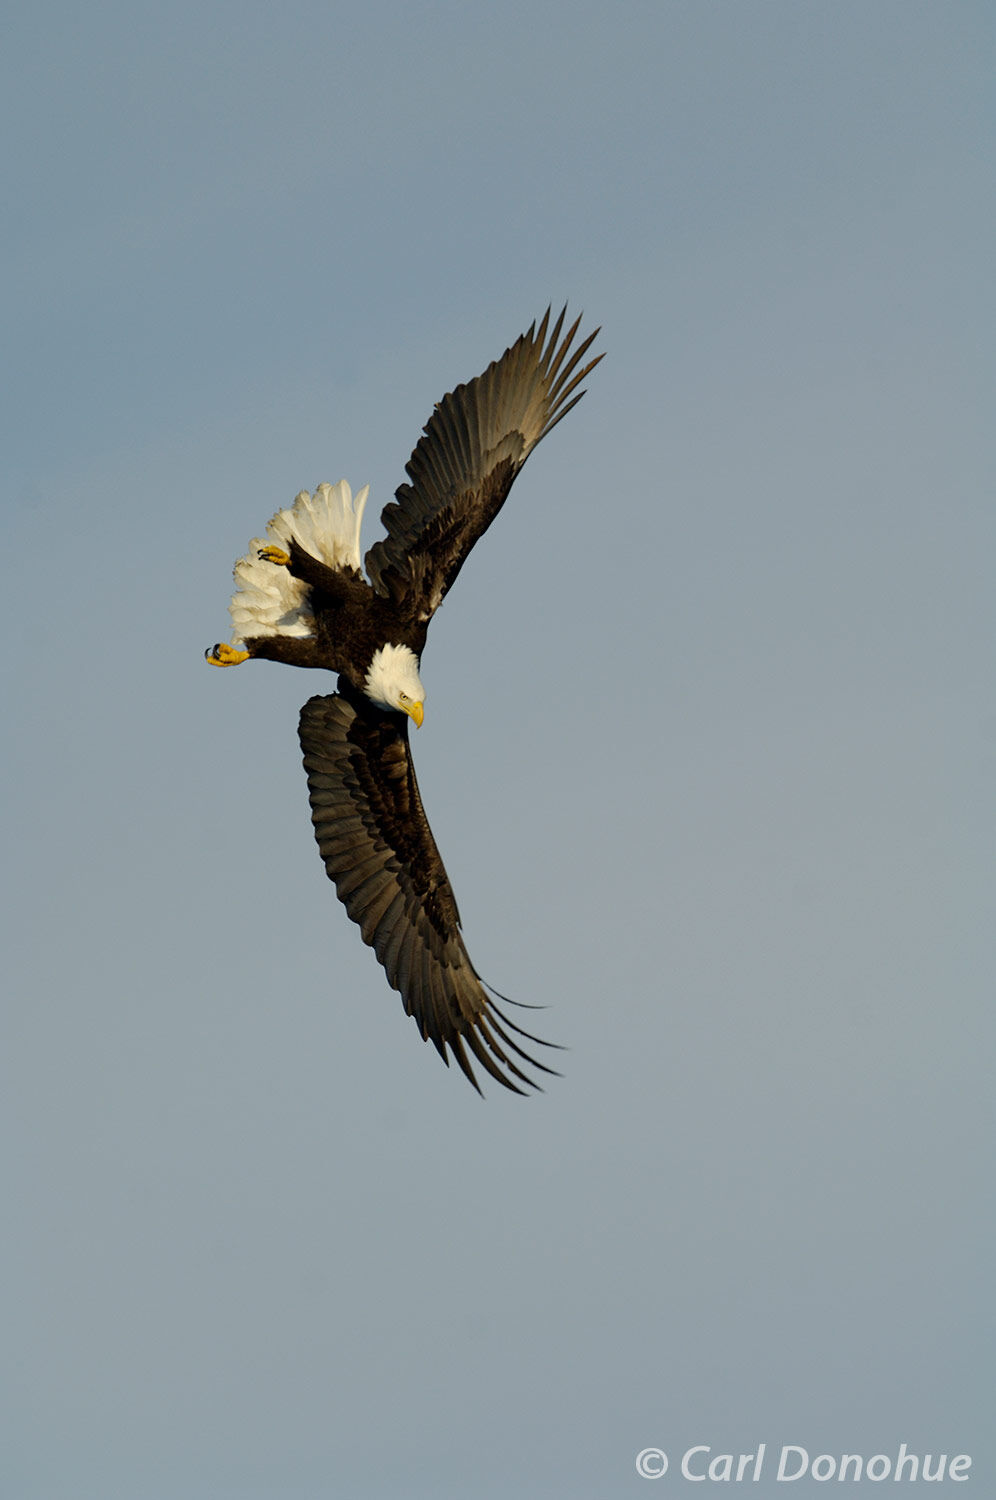 A bald eagle takes to the air in search of its next meal in Kachemak Bay, Alaska. Bald eagle fishing in Kachemak Bay, near Homer...